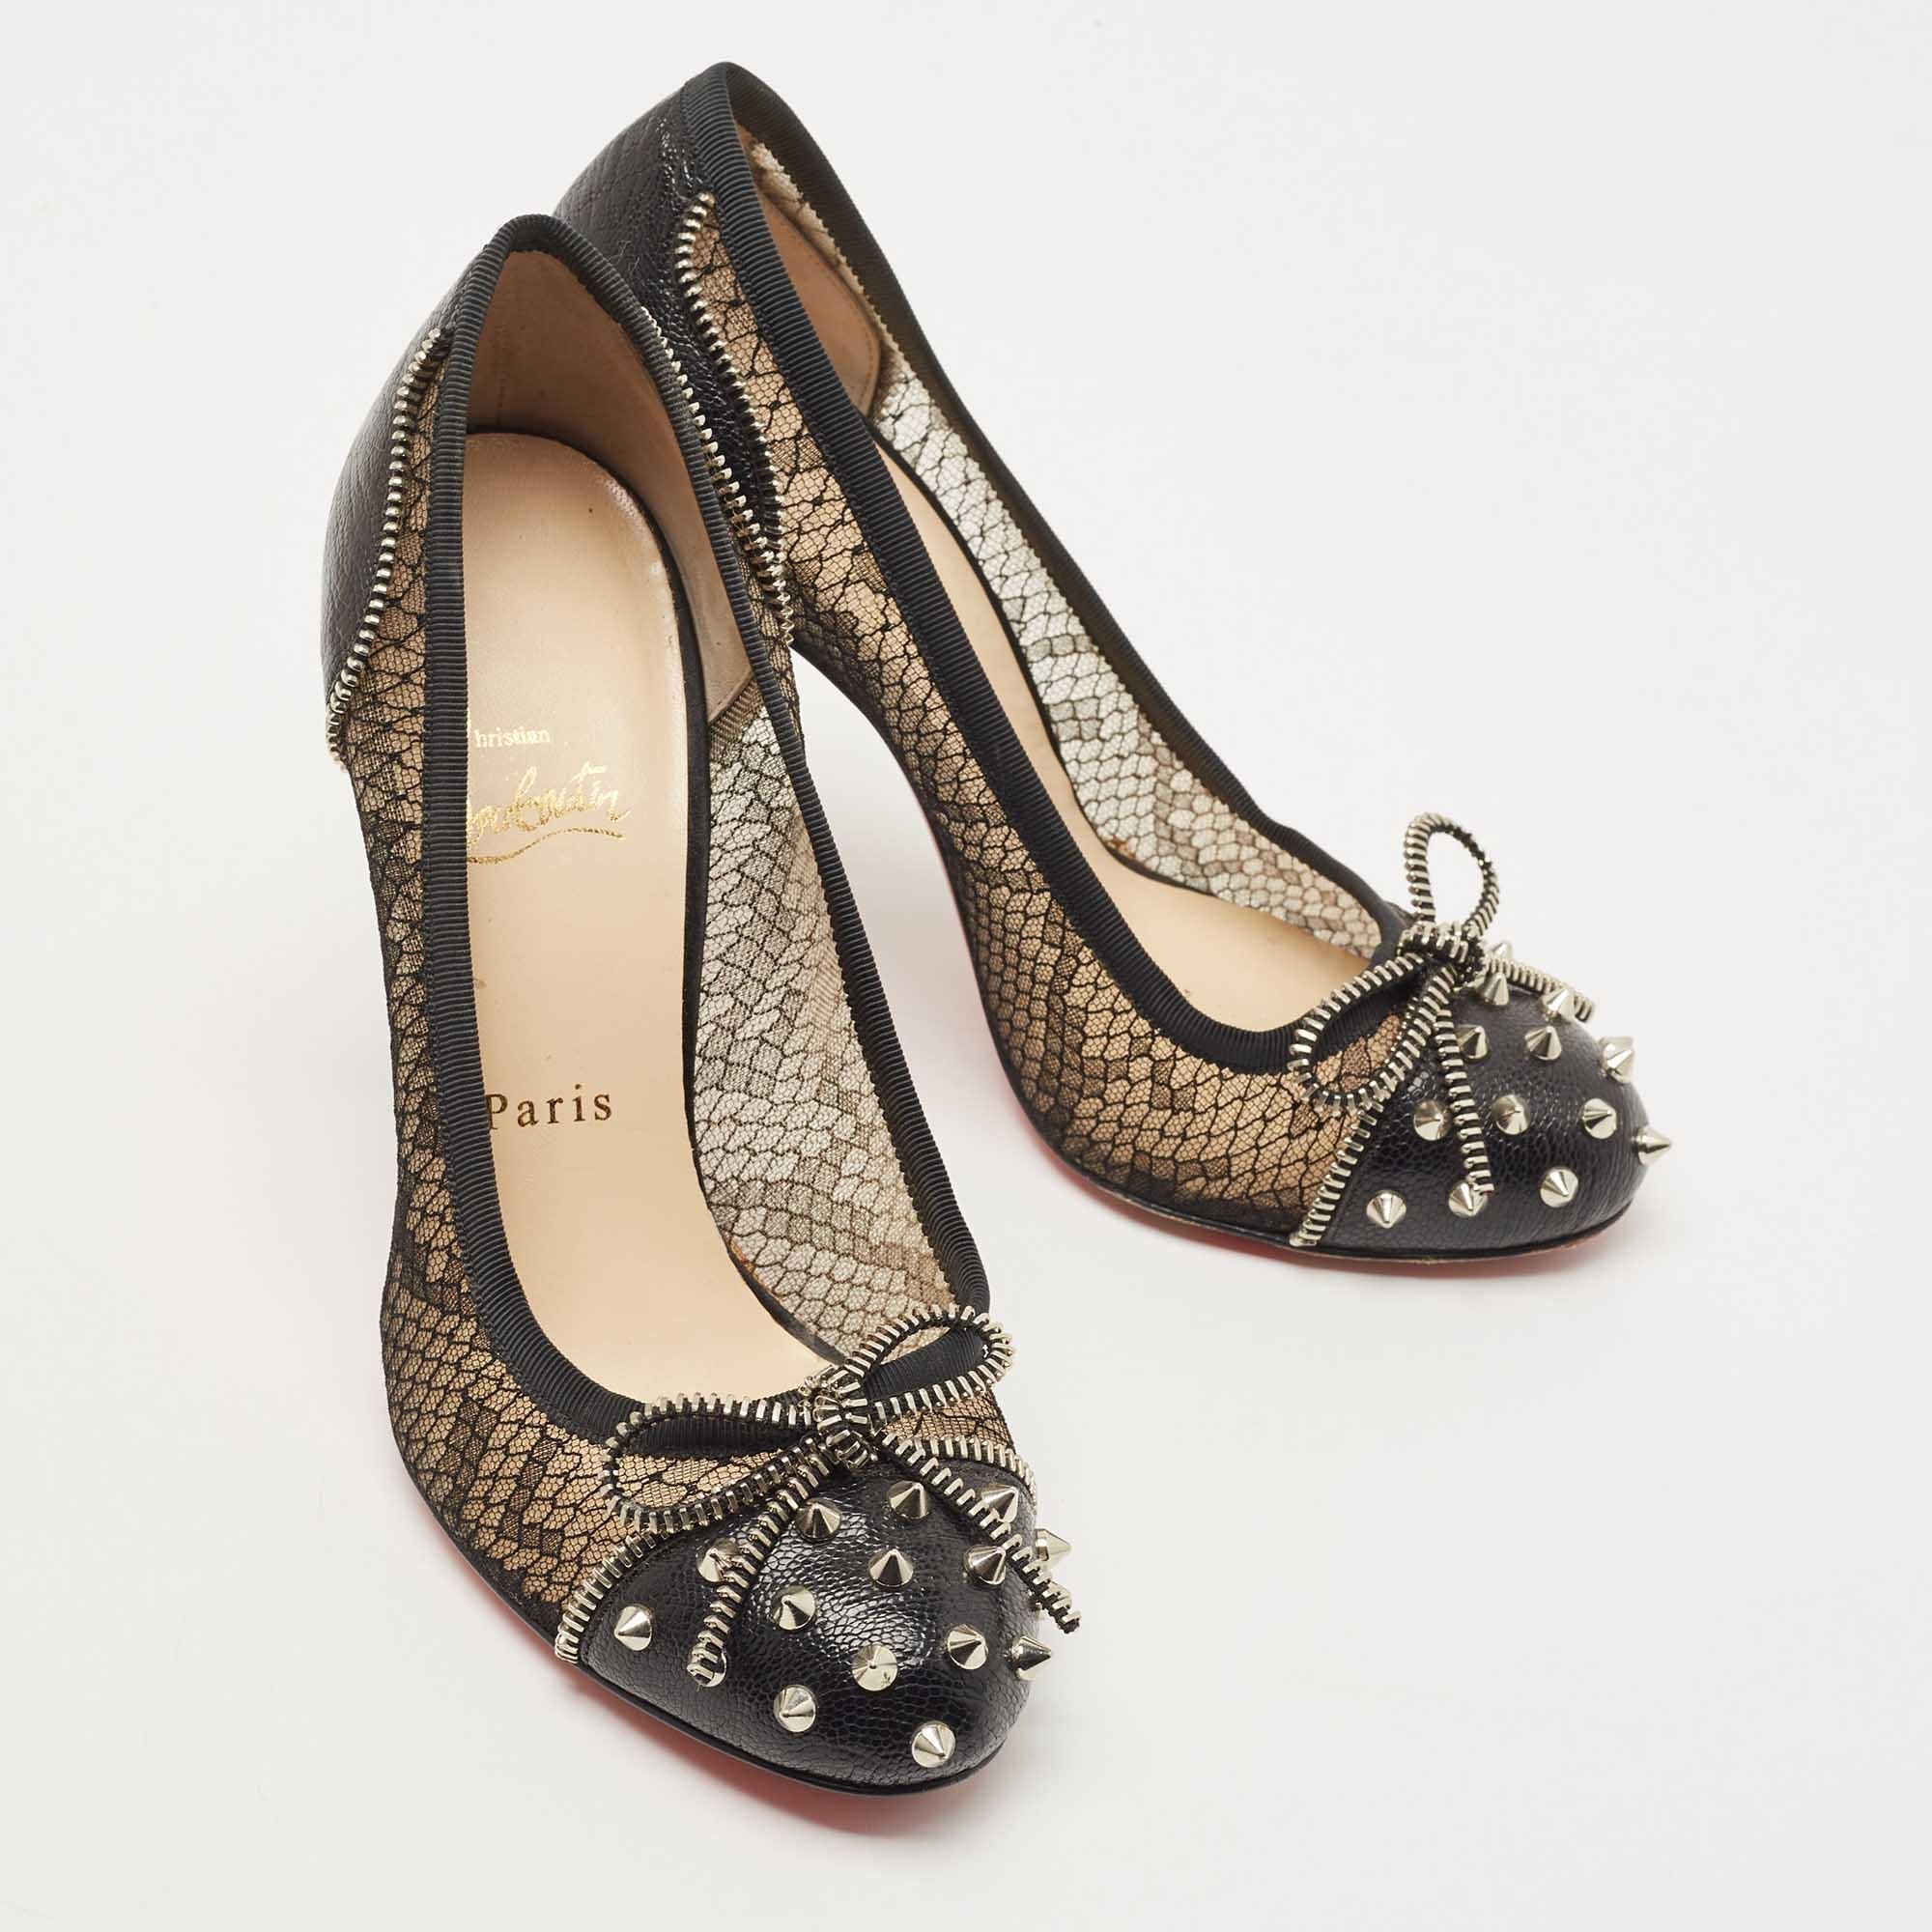 Christian Louboutin Black Leather and Lace Candy Spiked Pumps Size 38 For Sale 1